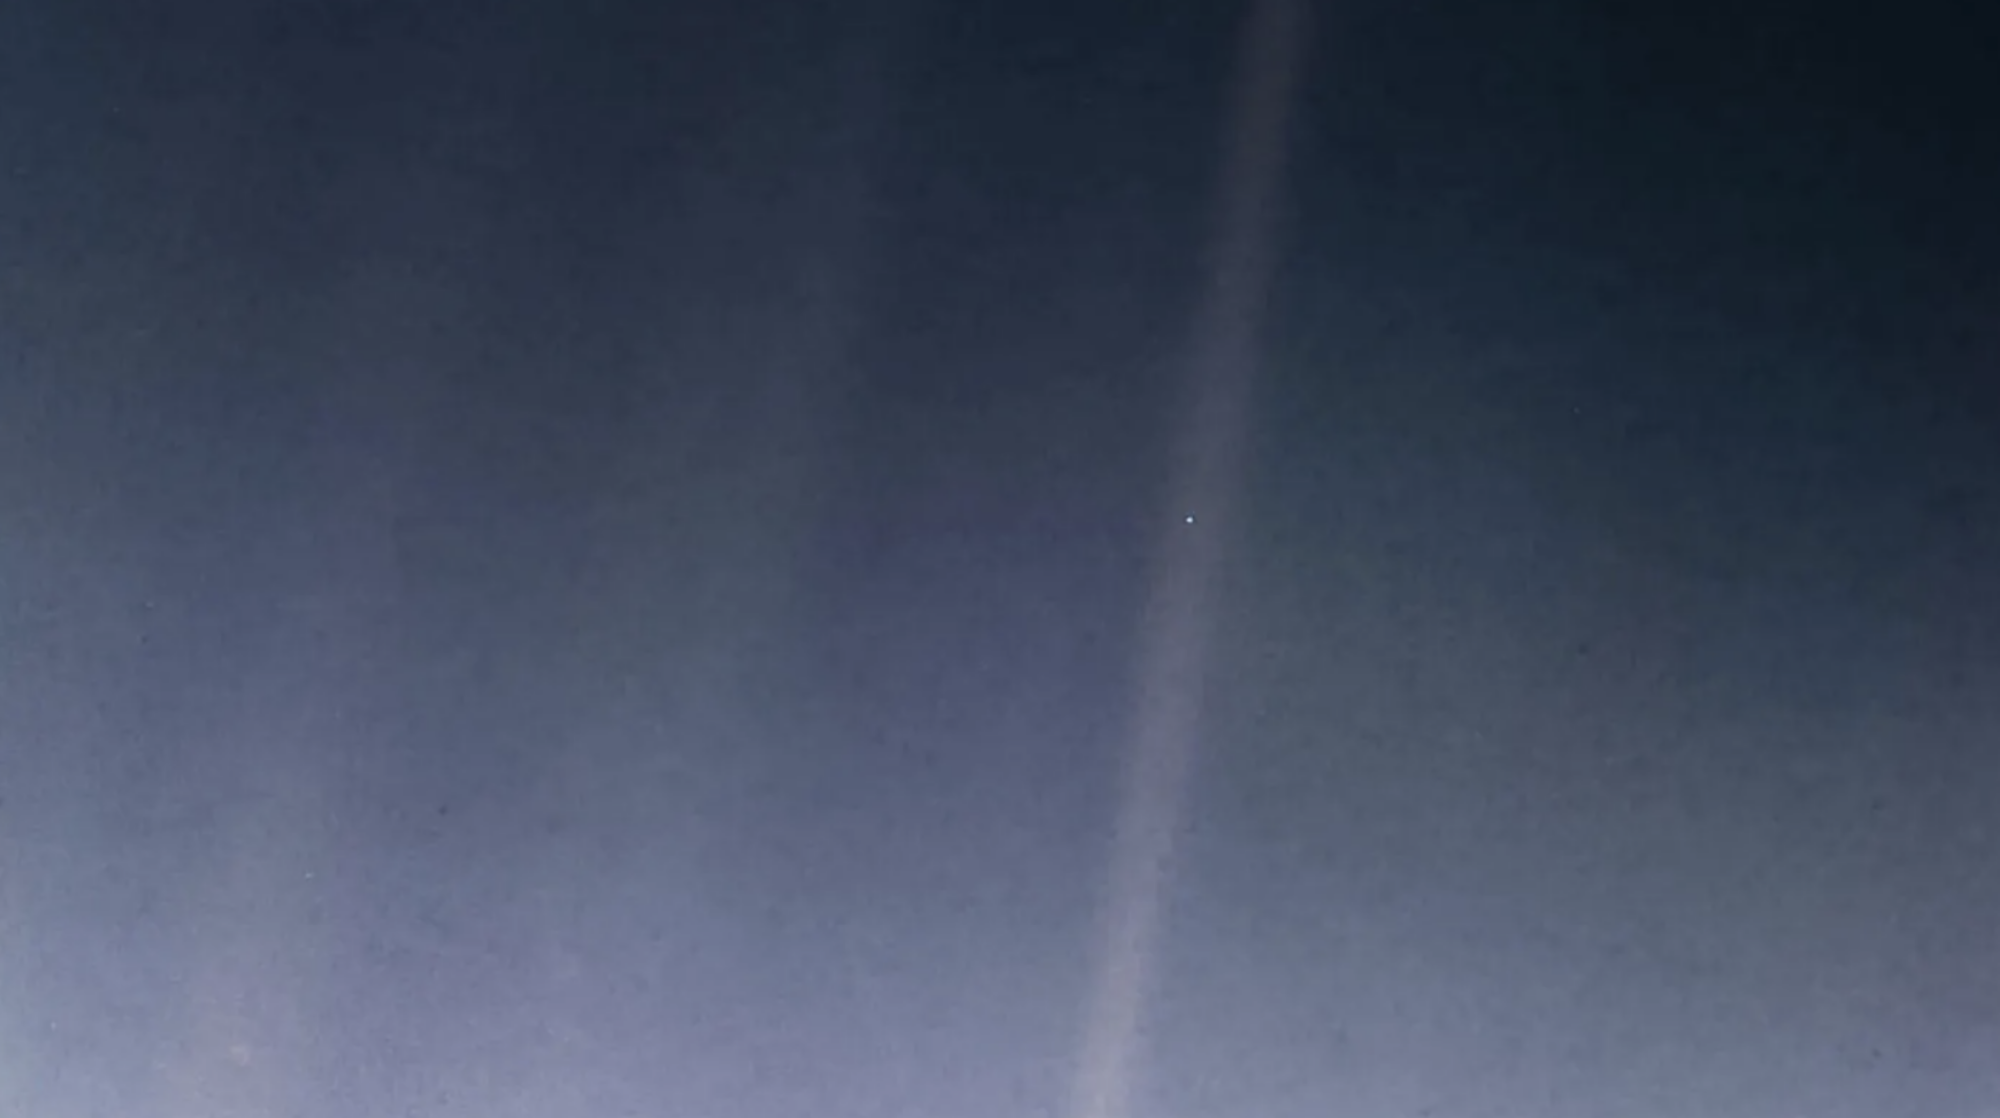 The "Pale Blue Dot," or Earth, captured by the Voyager 1 spacecraft.